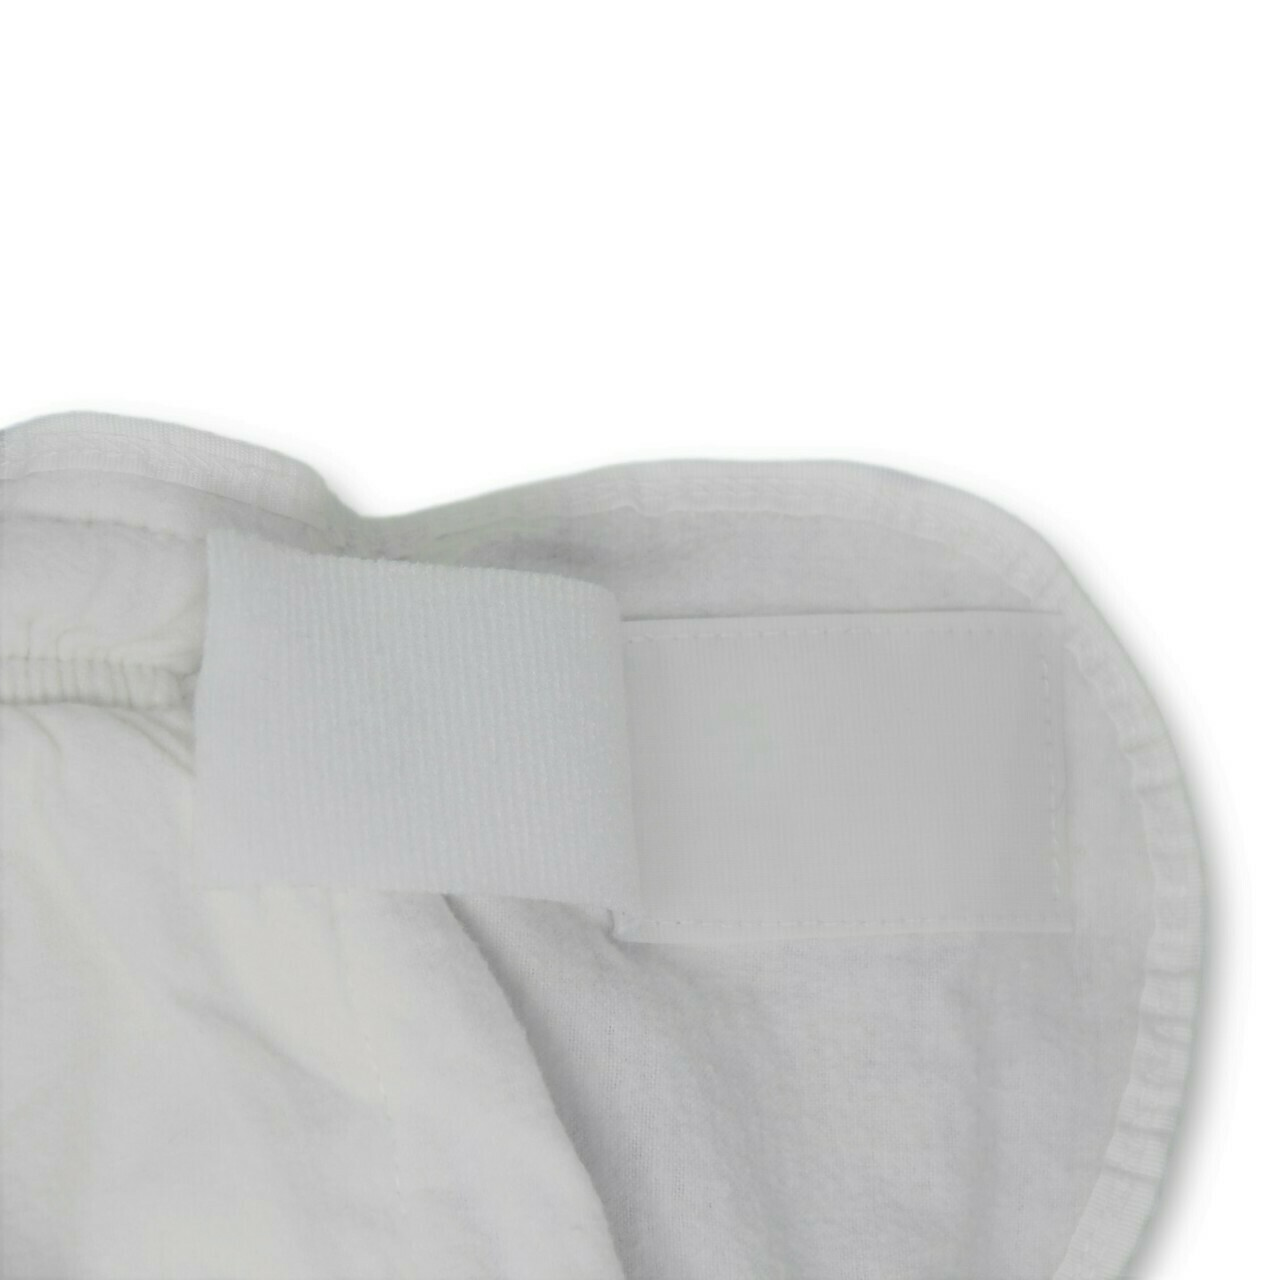 350: Adult Bulky Nighttime Cloth Diaper (Velcro tabs) – Protex